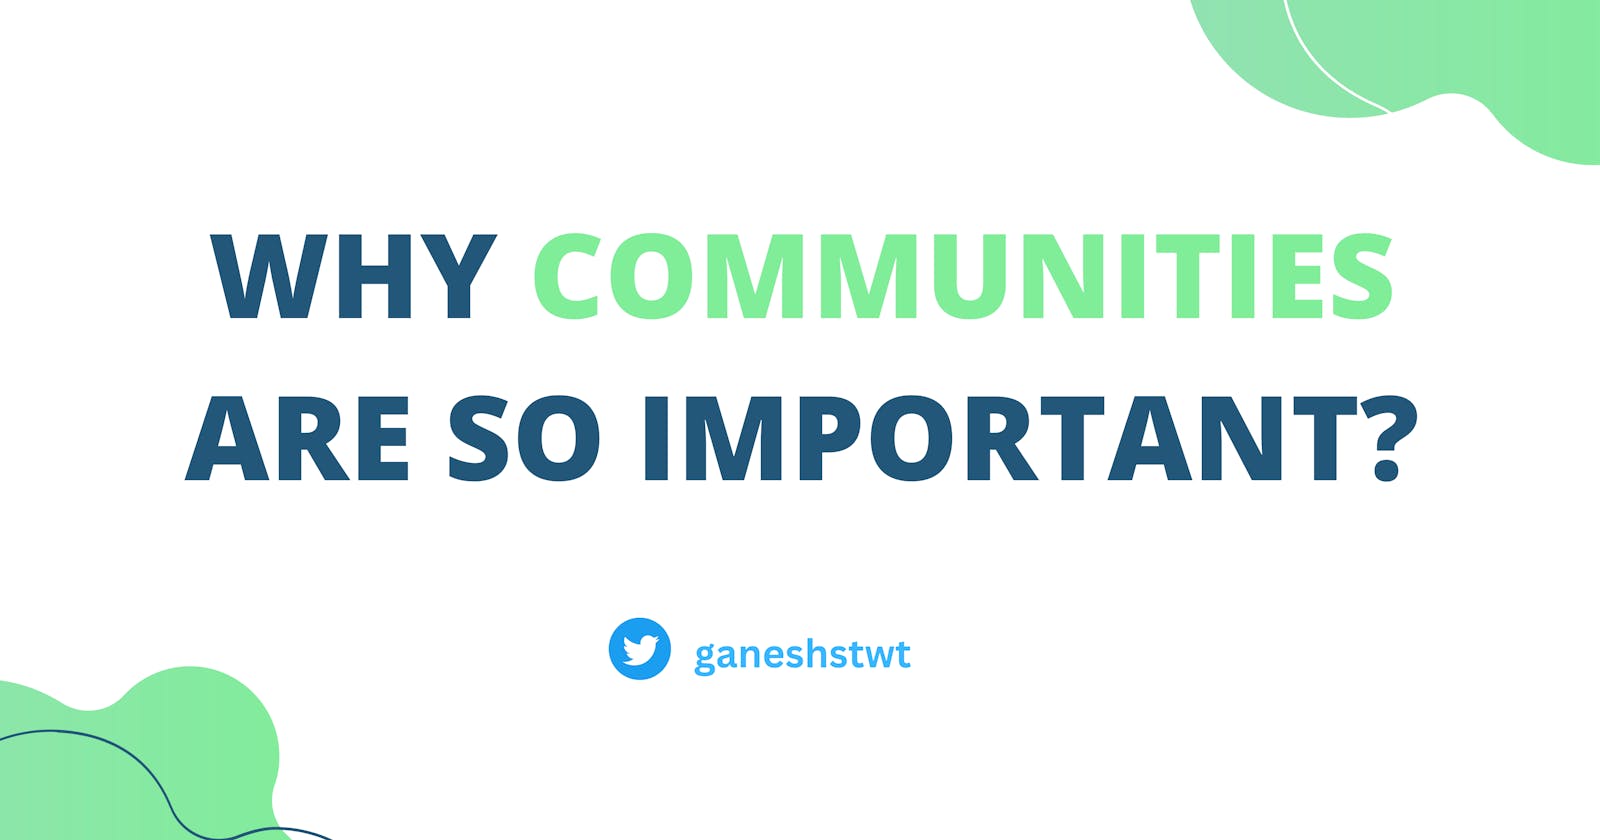 Why Communities Are So Important?